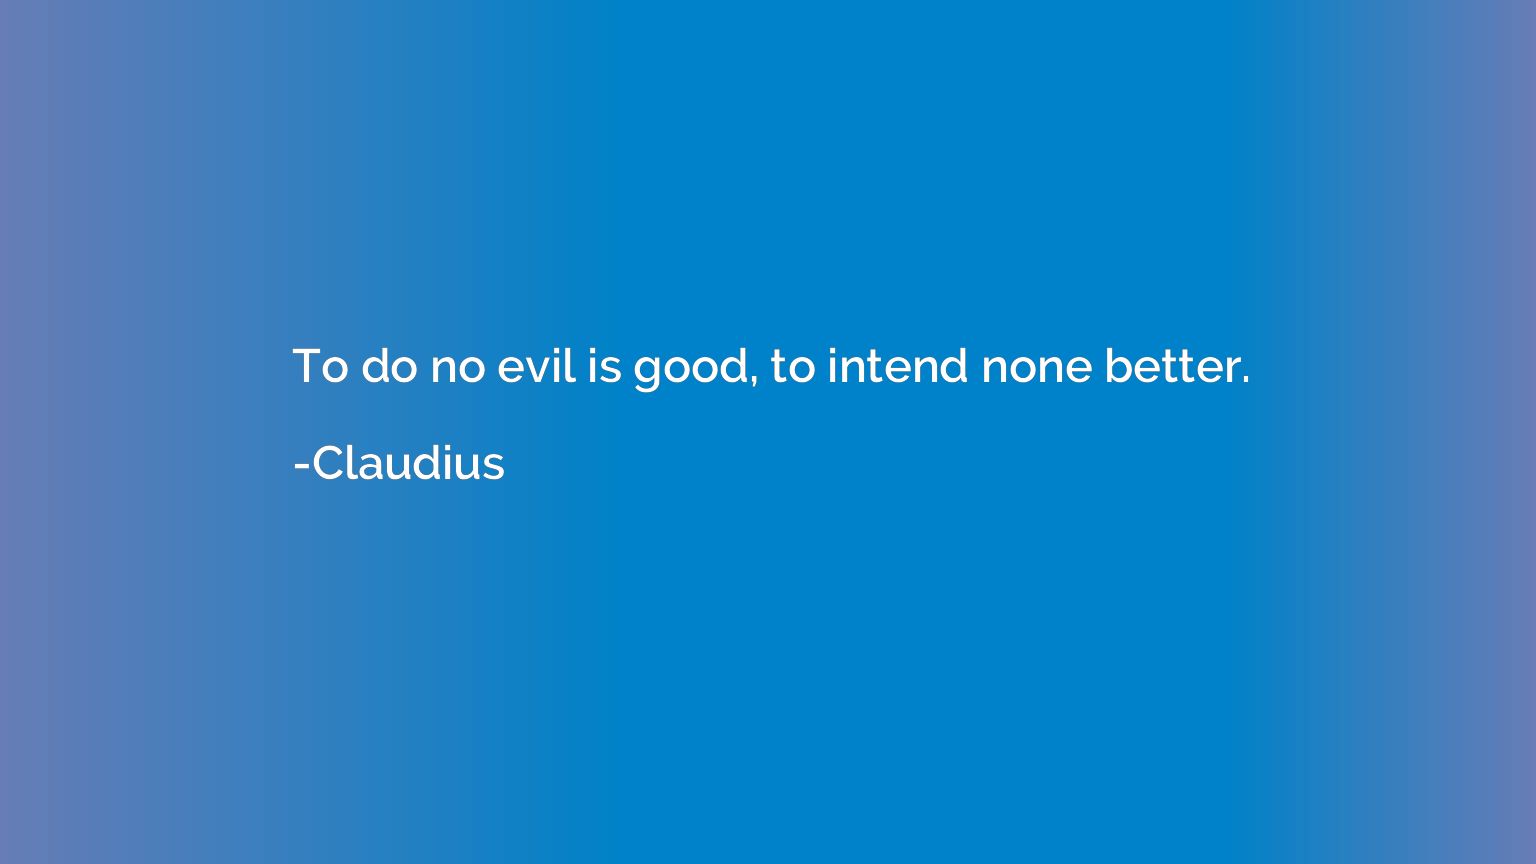 To do no evil is good, to intend none better.